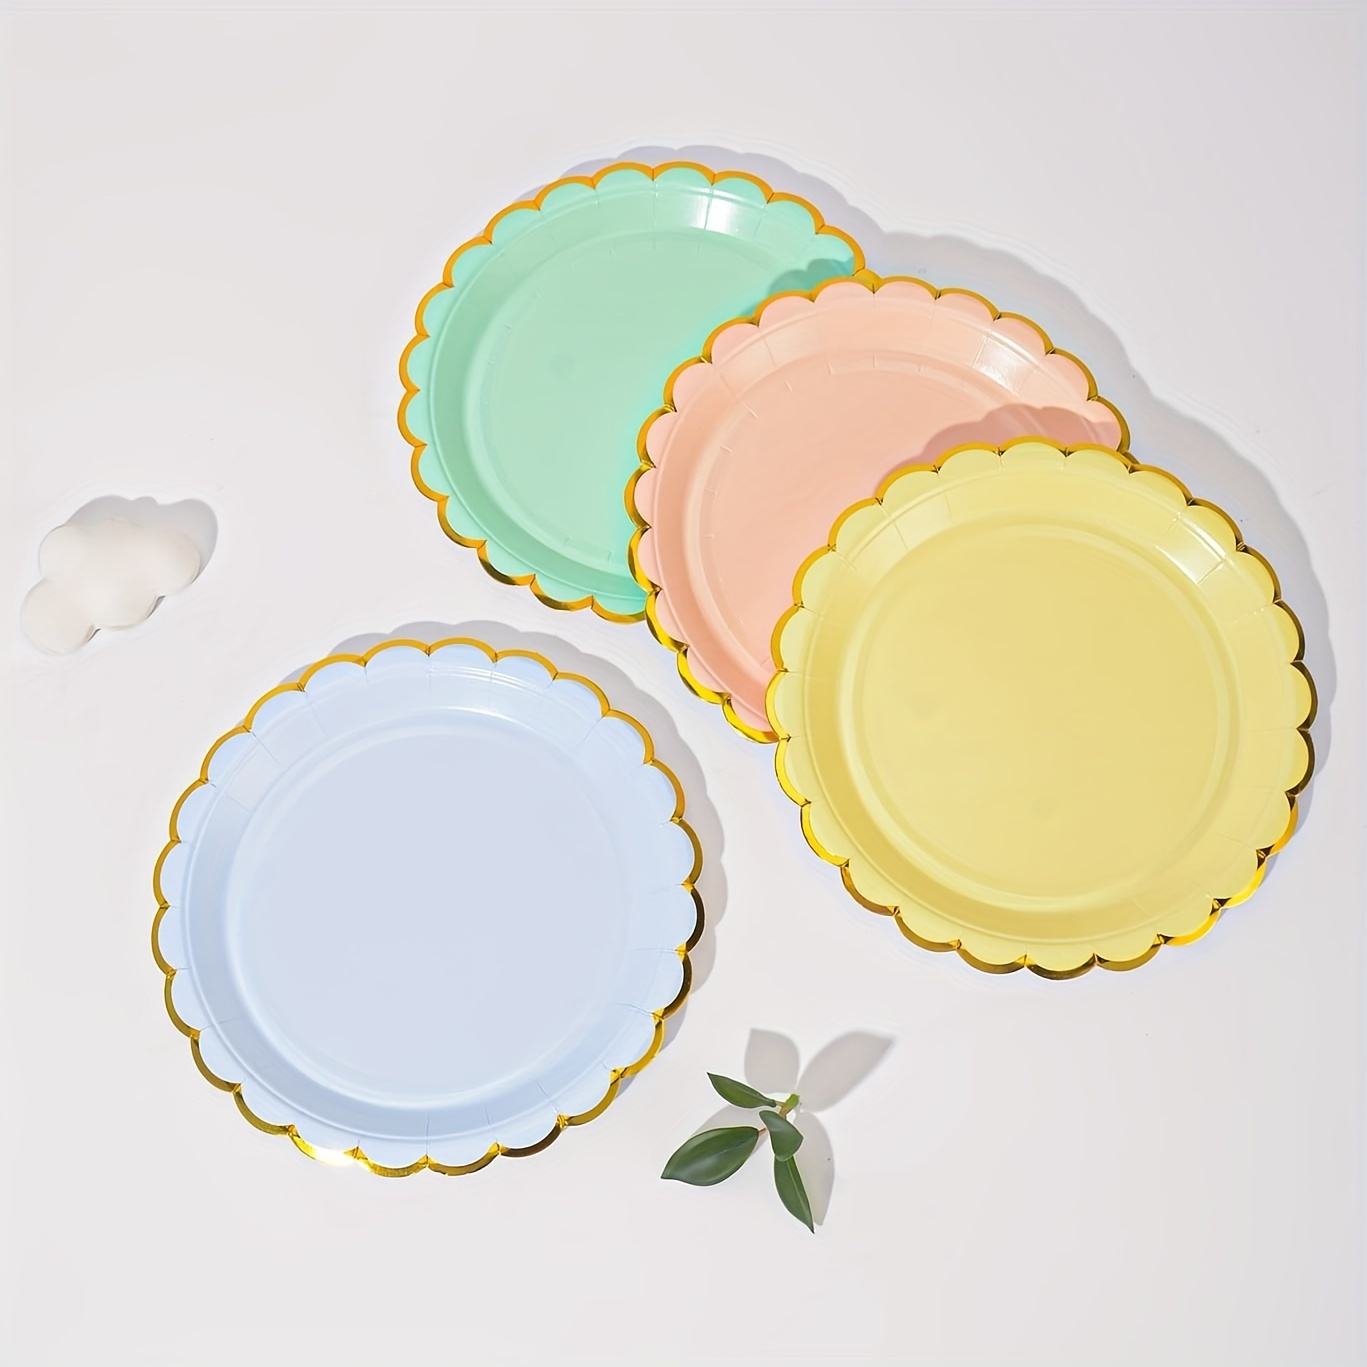 10pcs 7in/9in Thick & Sturdy Green Disposable Plates, , Compostable,  Light-weighted Paper Plate. Ideal For Birthday, Baby Shower, Wedding,  Hawaiian Party, Restaurant, Any Occasion.